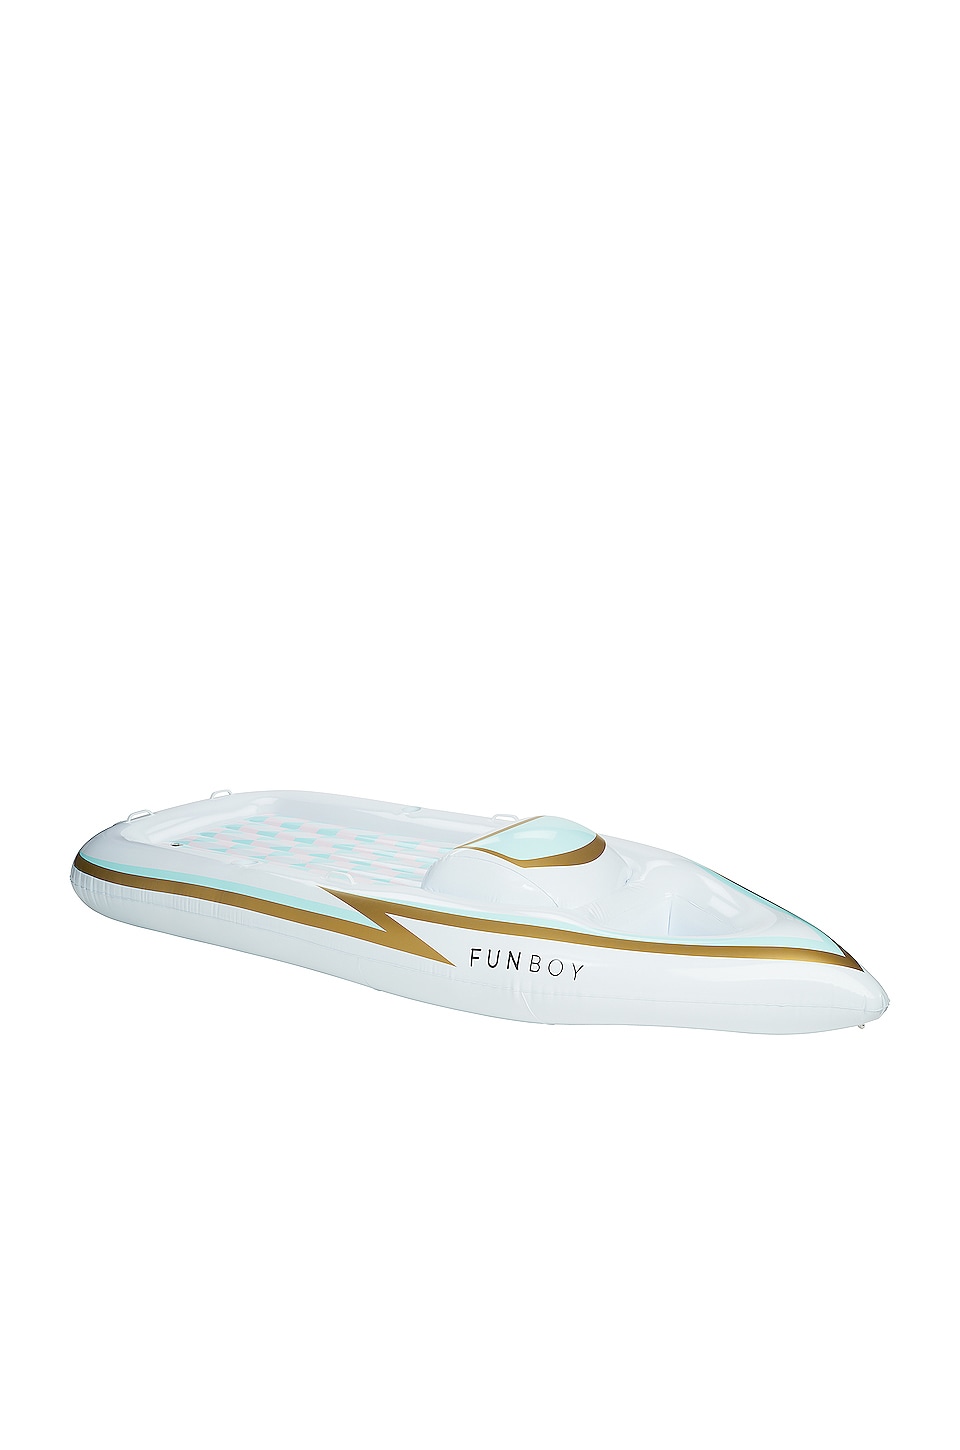 FUNBOY YACHT INFLATABLE POOL FLOAT,FUNR-WA21